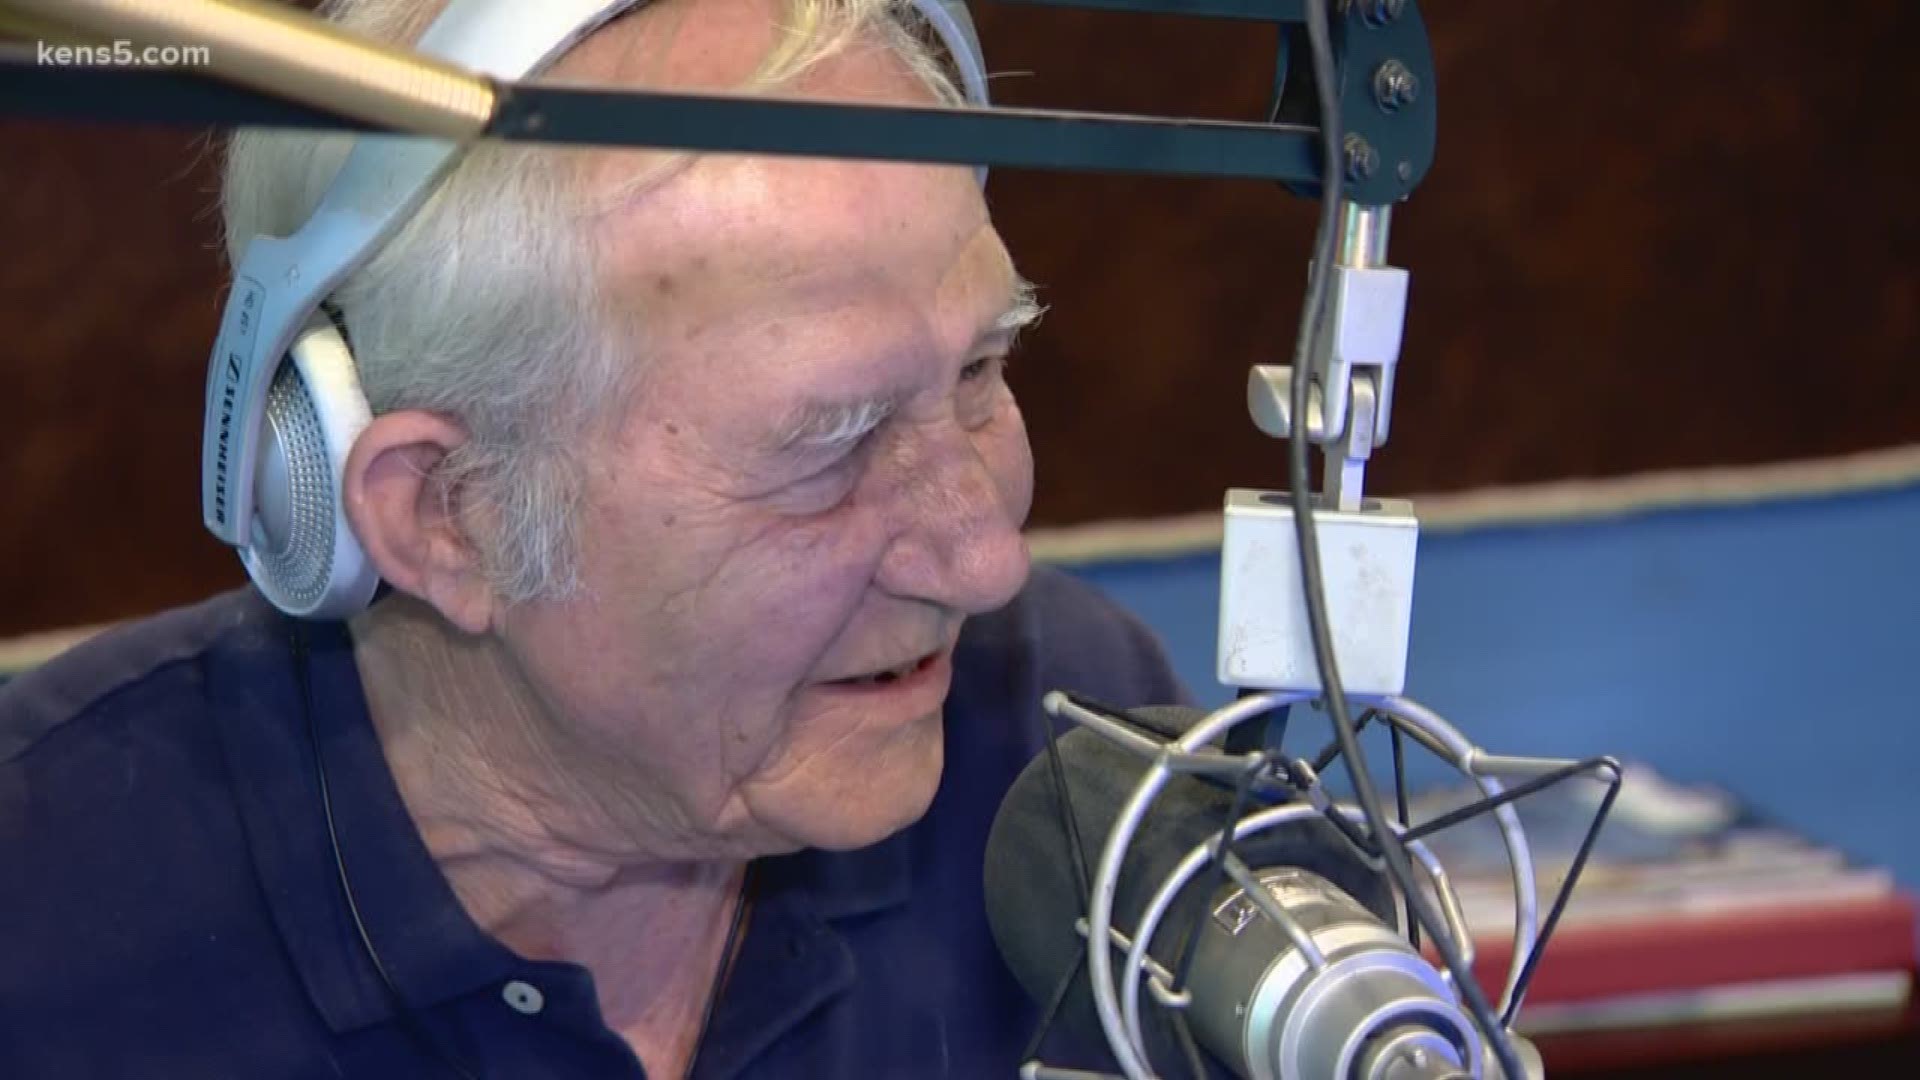 "The Cousin" Jerry King is a country radio legend about to retire. And he's one of the people who makes San Antonio great.